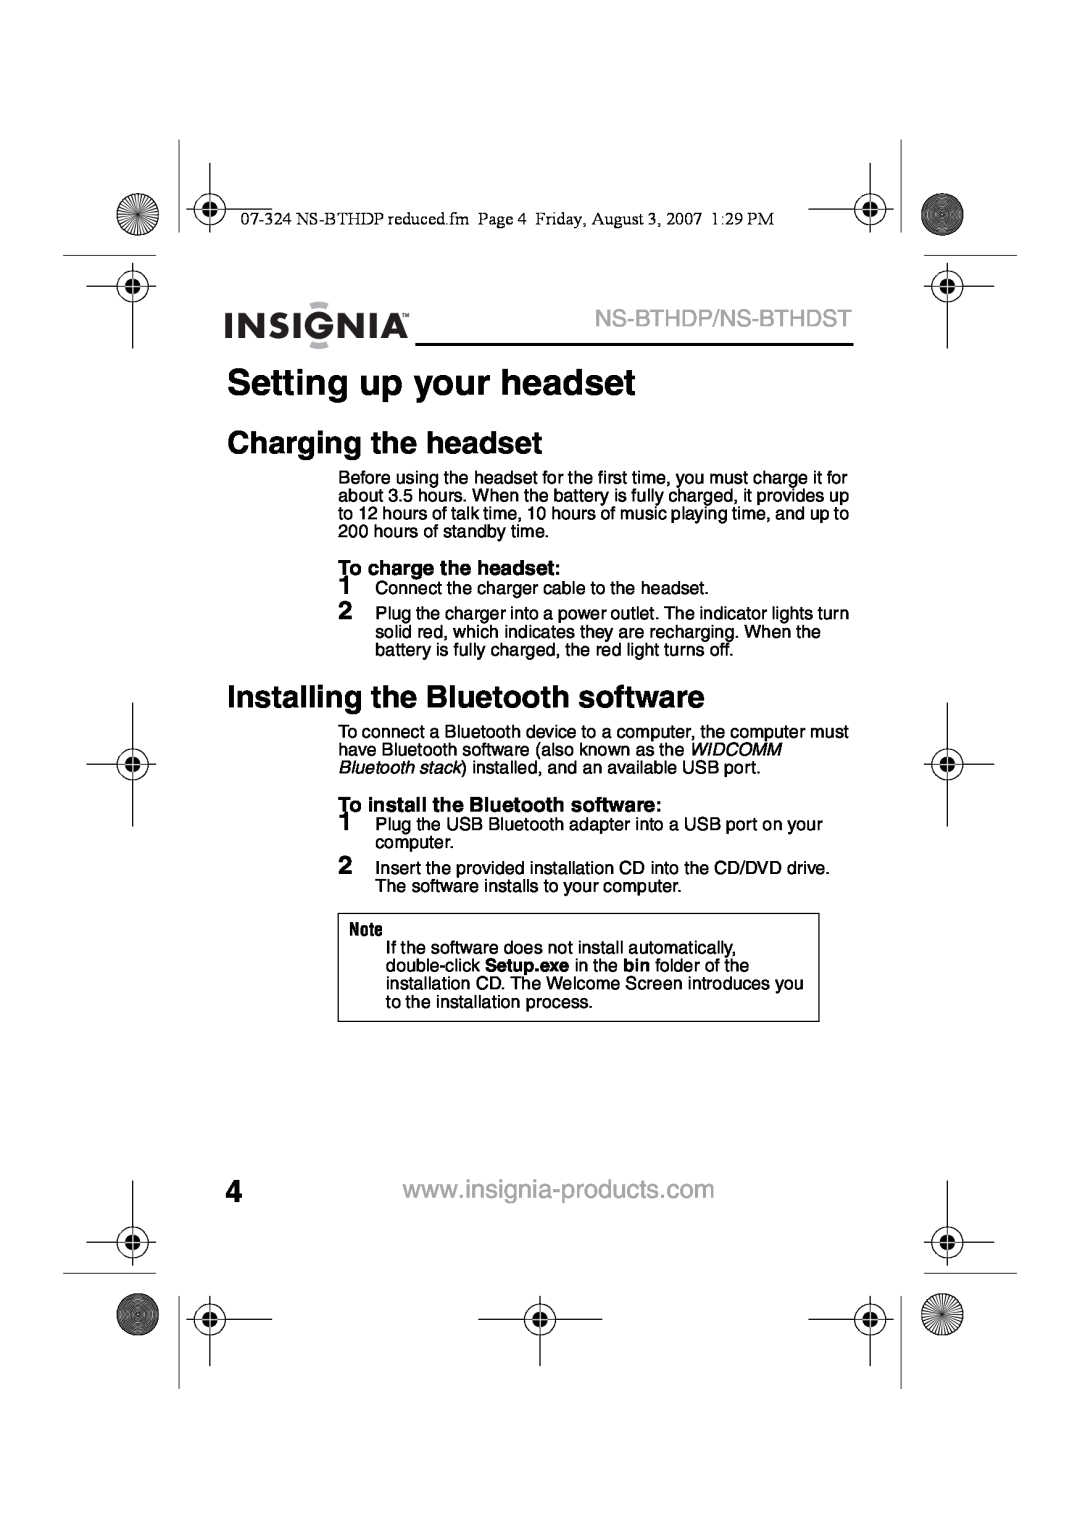 Insignia NS-BTHDST Setting up your headset, Charging the headset, Installing the Bluetooth software, Ns-Bthdp/Ns-Bthdst 